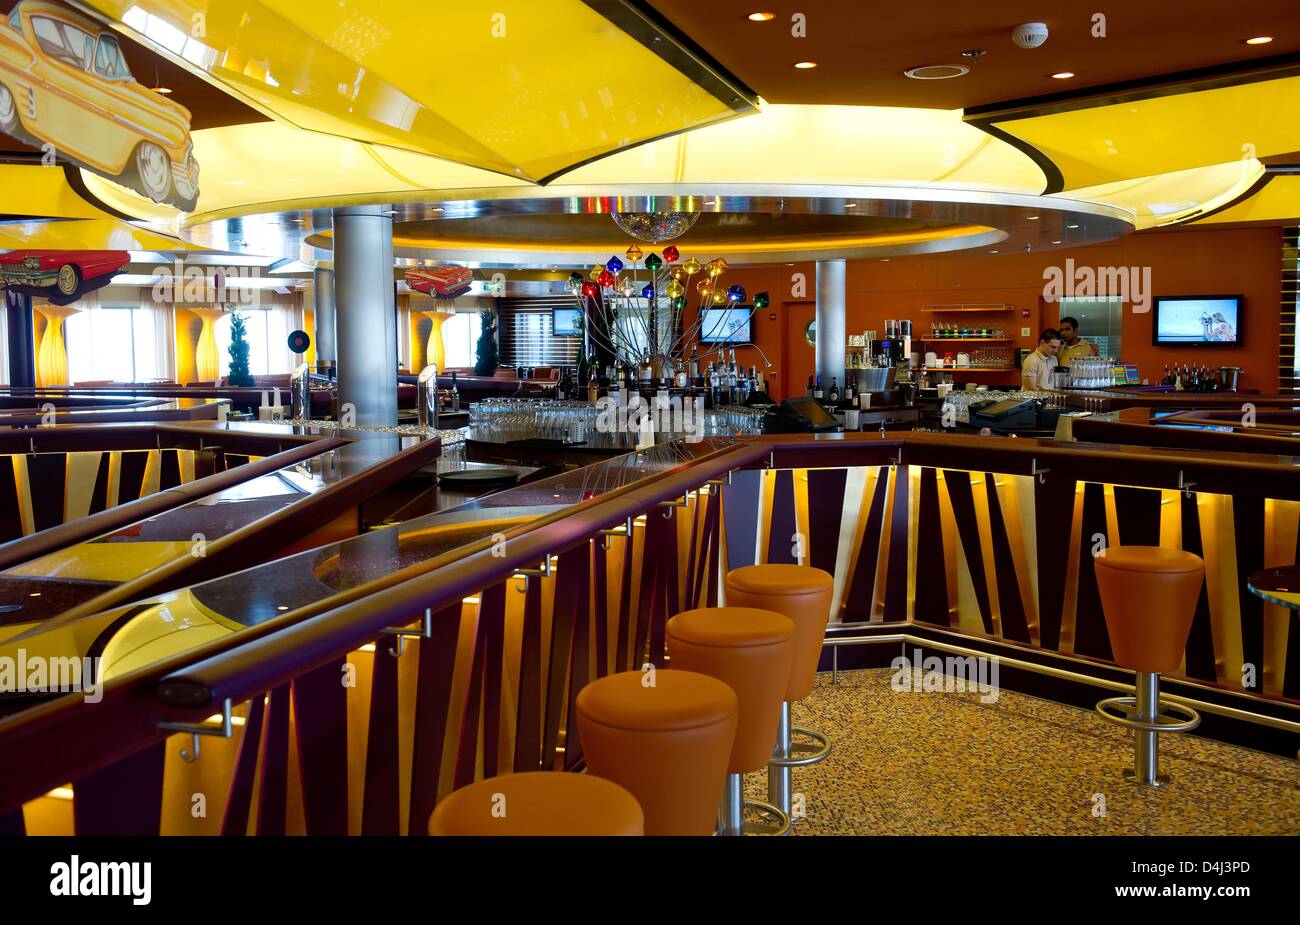 A bar is pictured on the AIDAstella cruise ship in Hamburg, Germany, 12 March 2013. The AIDAstella has 14 decks, is 253 meters long and 32.2 meters wide. Photo: Sven Hoppe Stock Photo